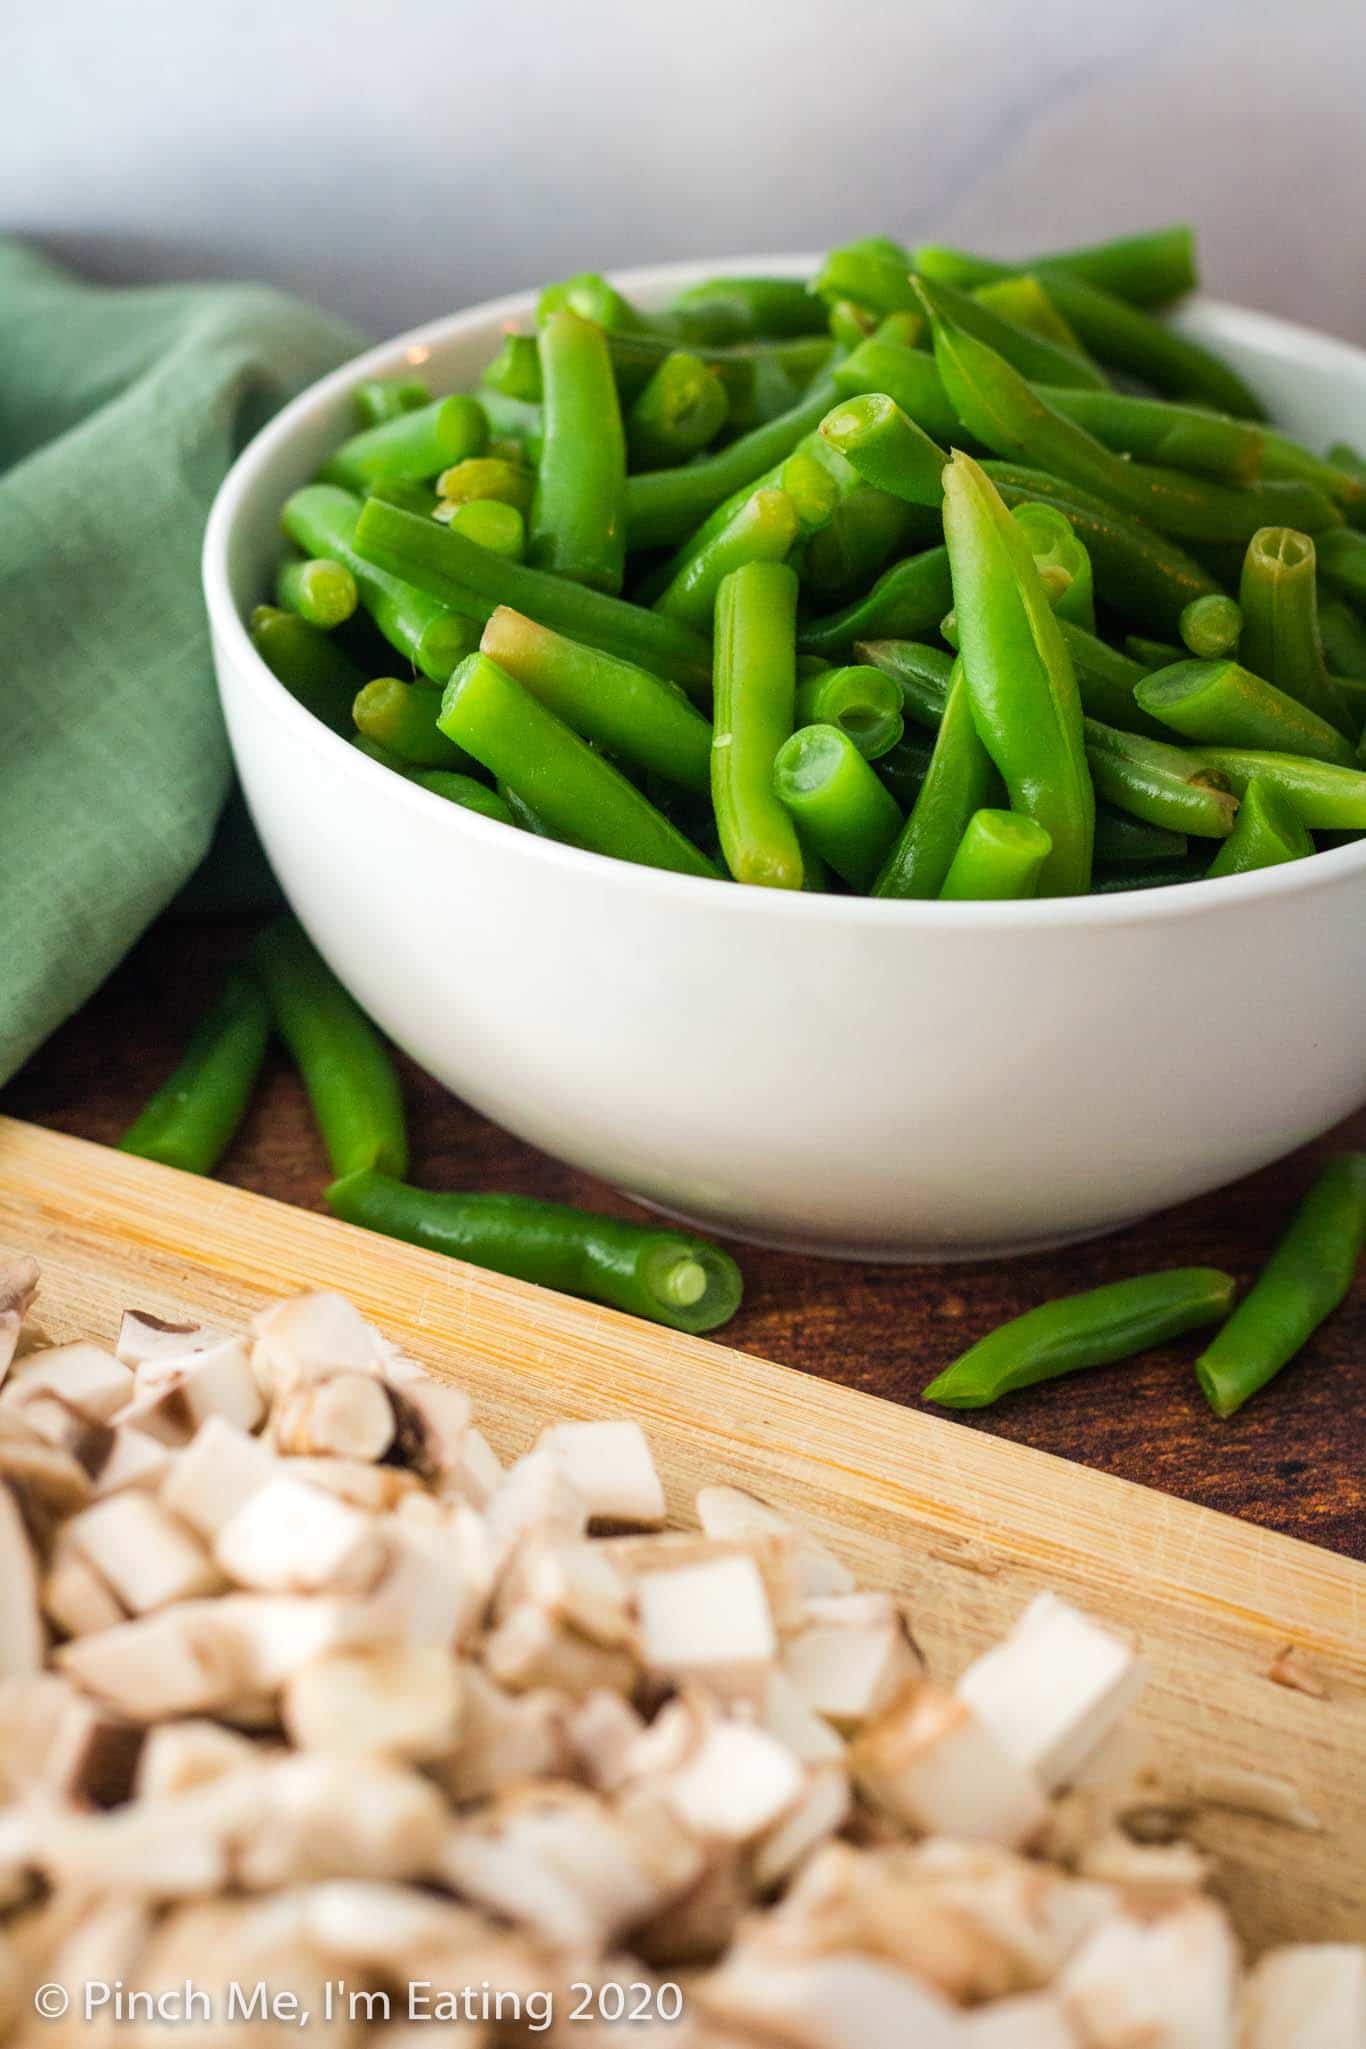 A white bowl of fresh blanched green beans with blurred mushrooms in the foreground